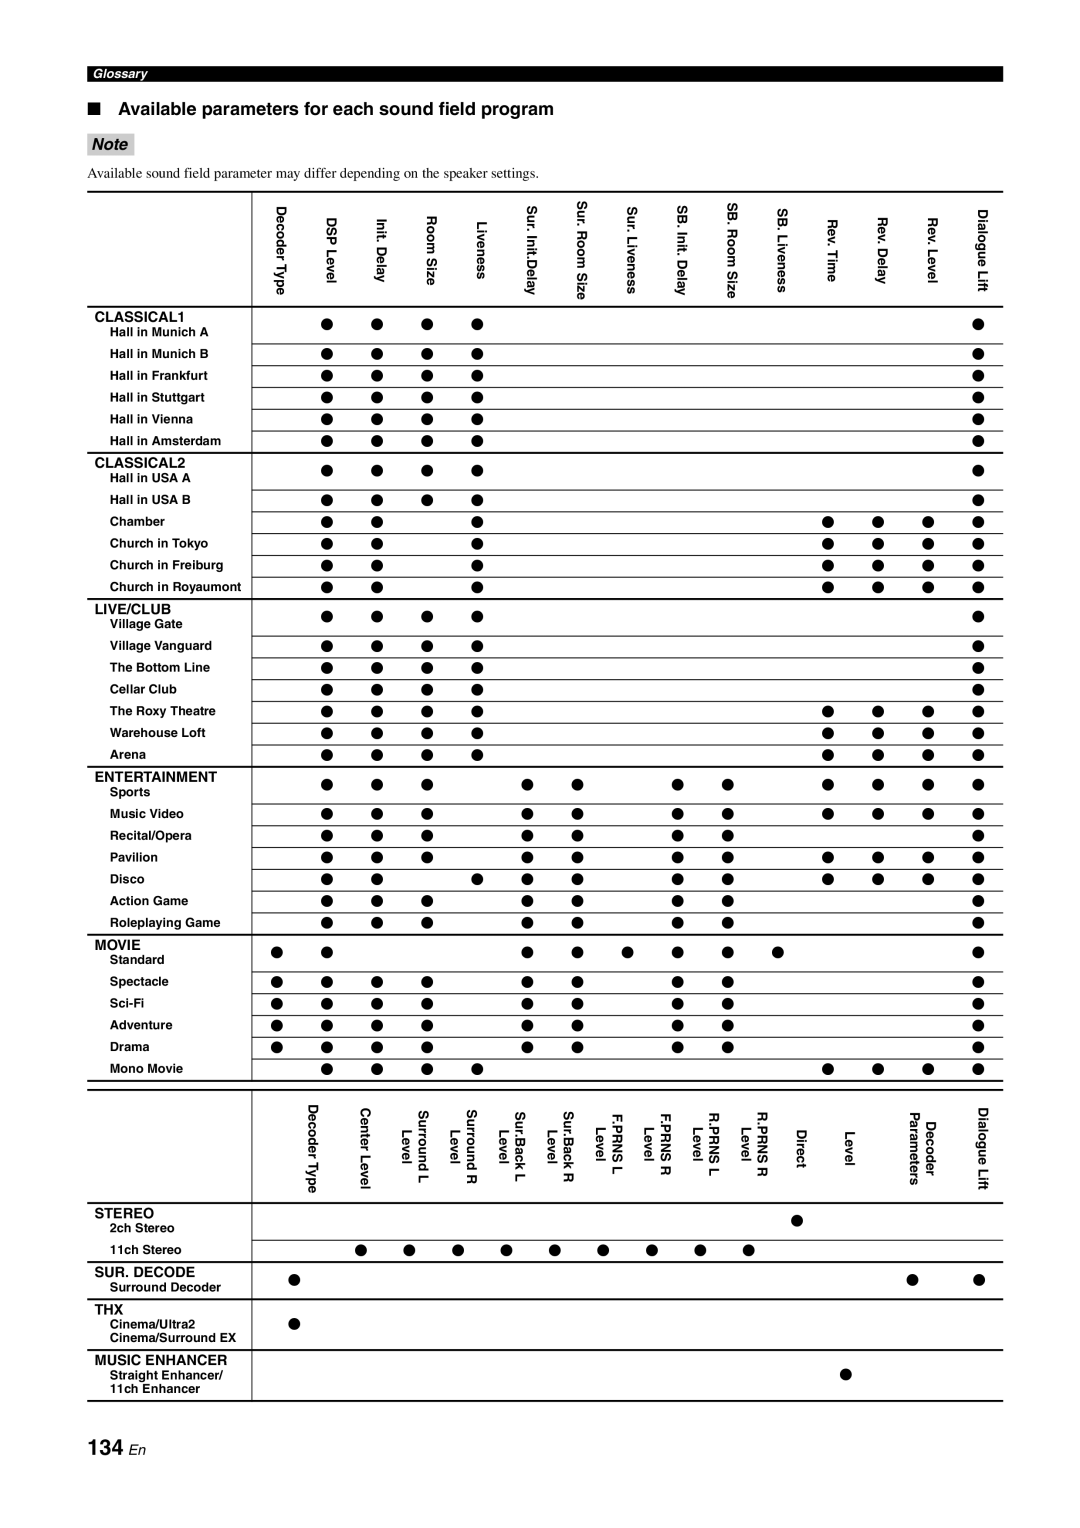 Yamaha DSP-Z11 owner manual 134 En, Available parameters for each sound field program 